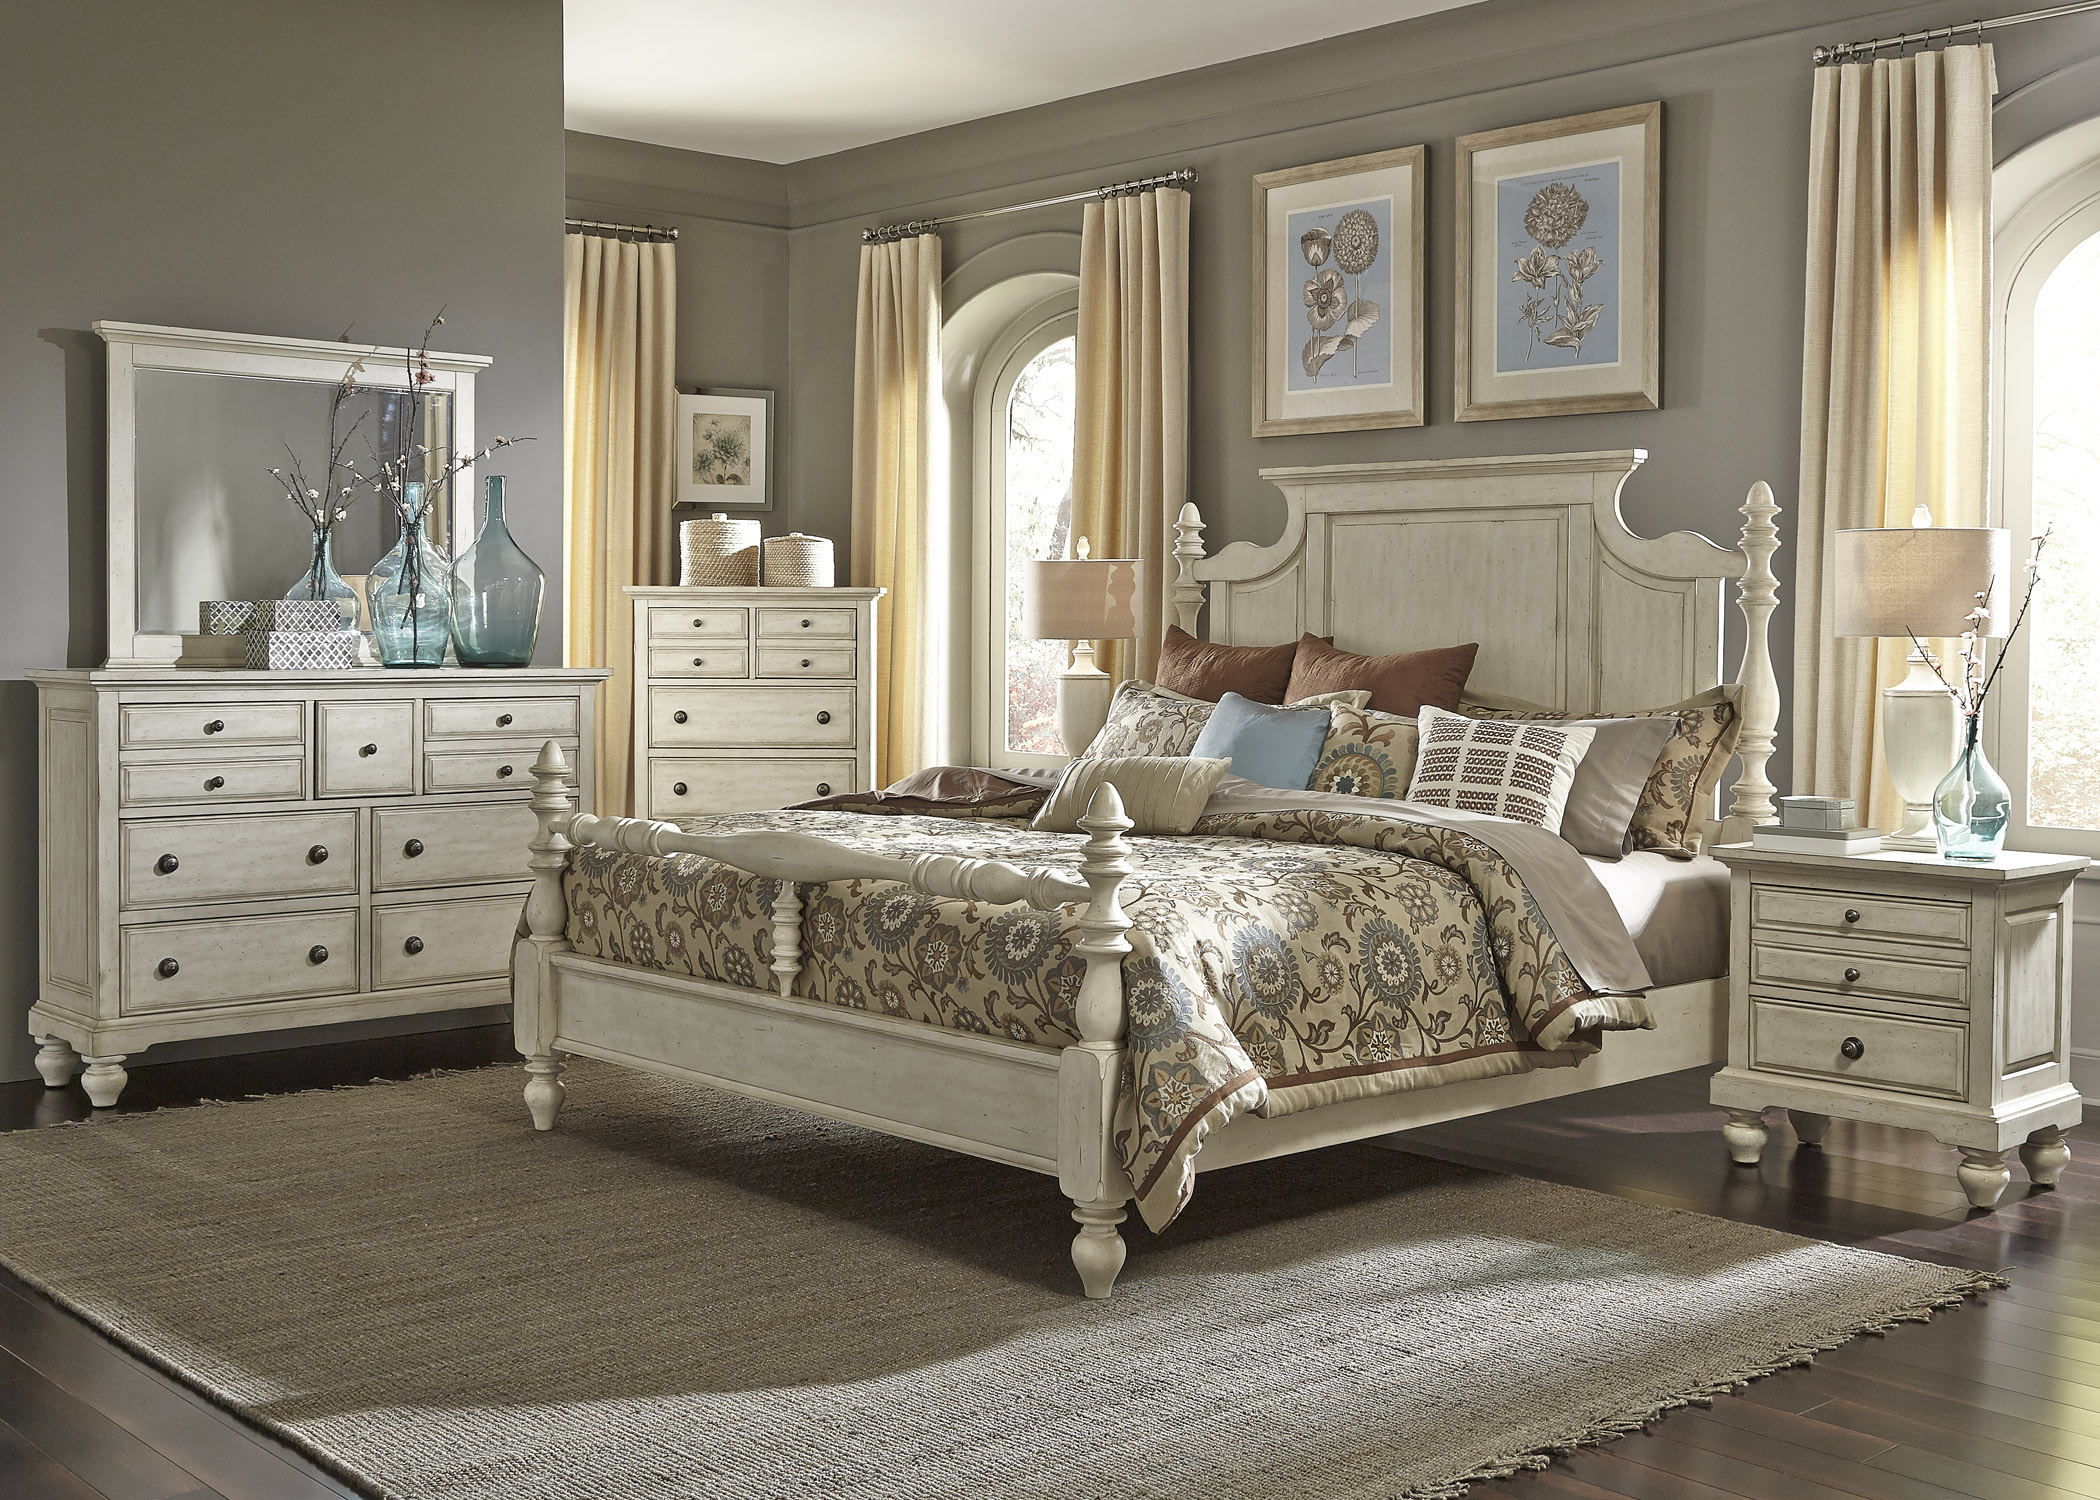 Liberty Furniture High Country Bedroom King Poster Bed, Dresser and Mirror Collection